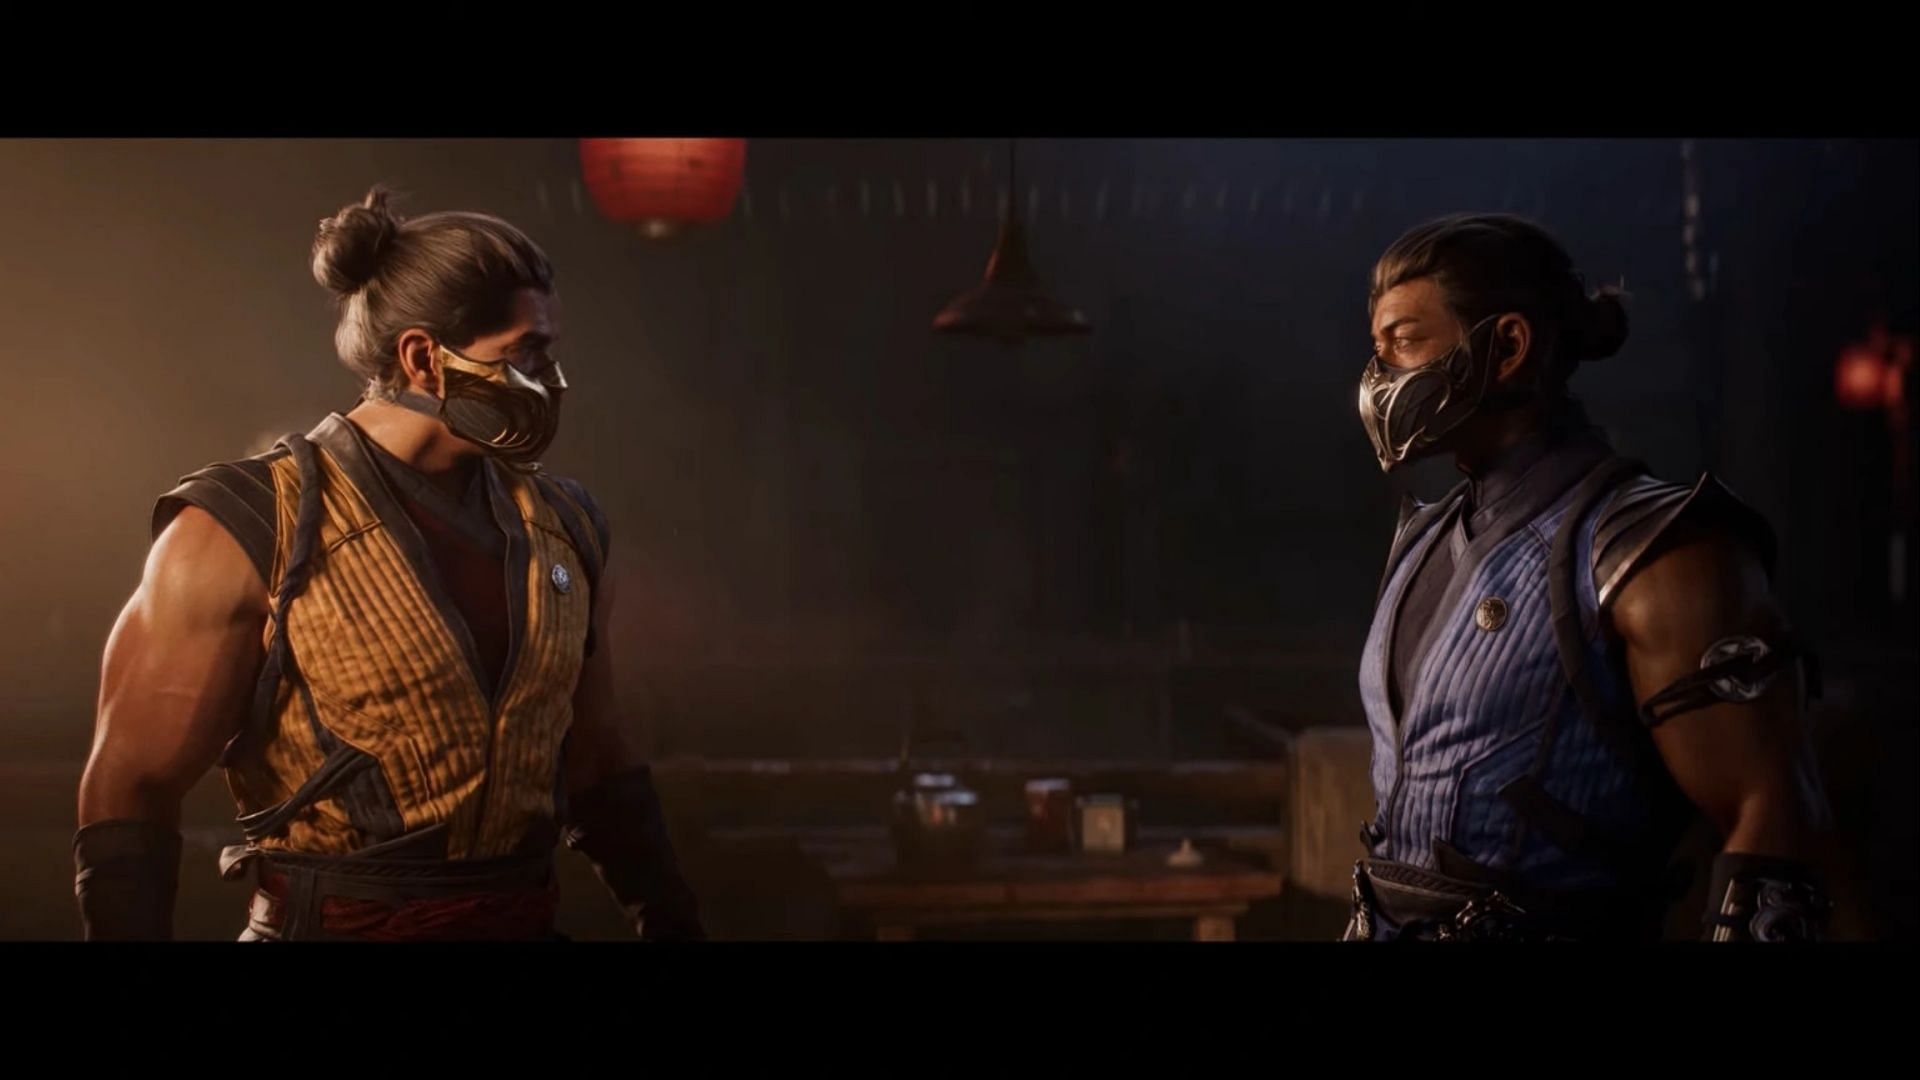 A day after the game was revealed, Mortal Kombat 1